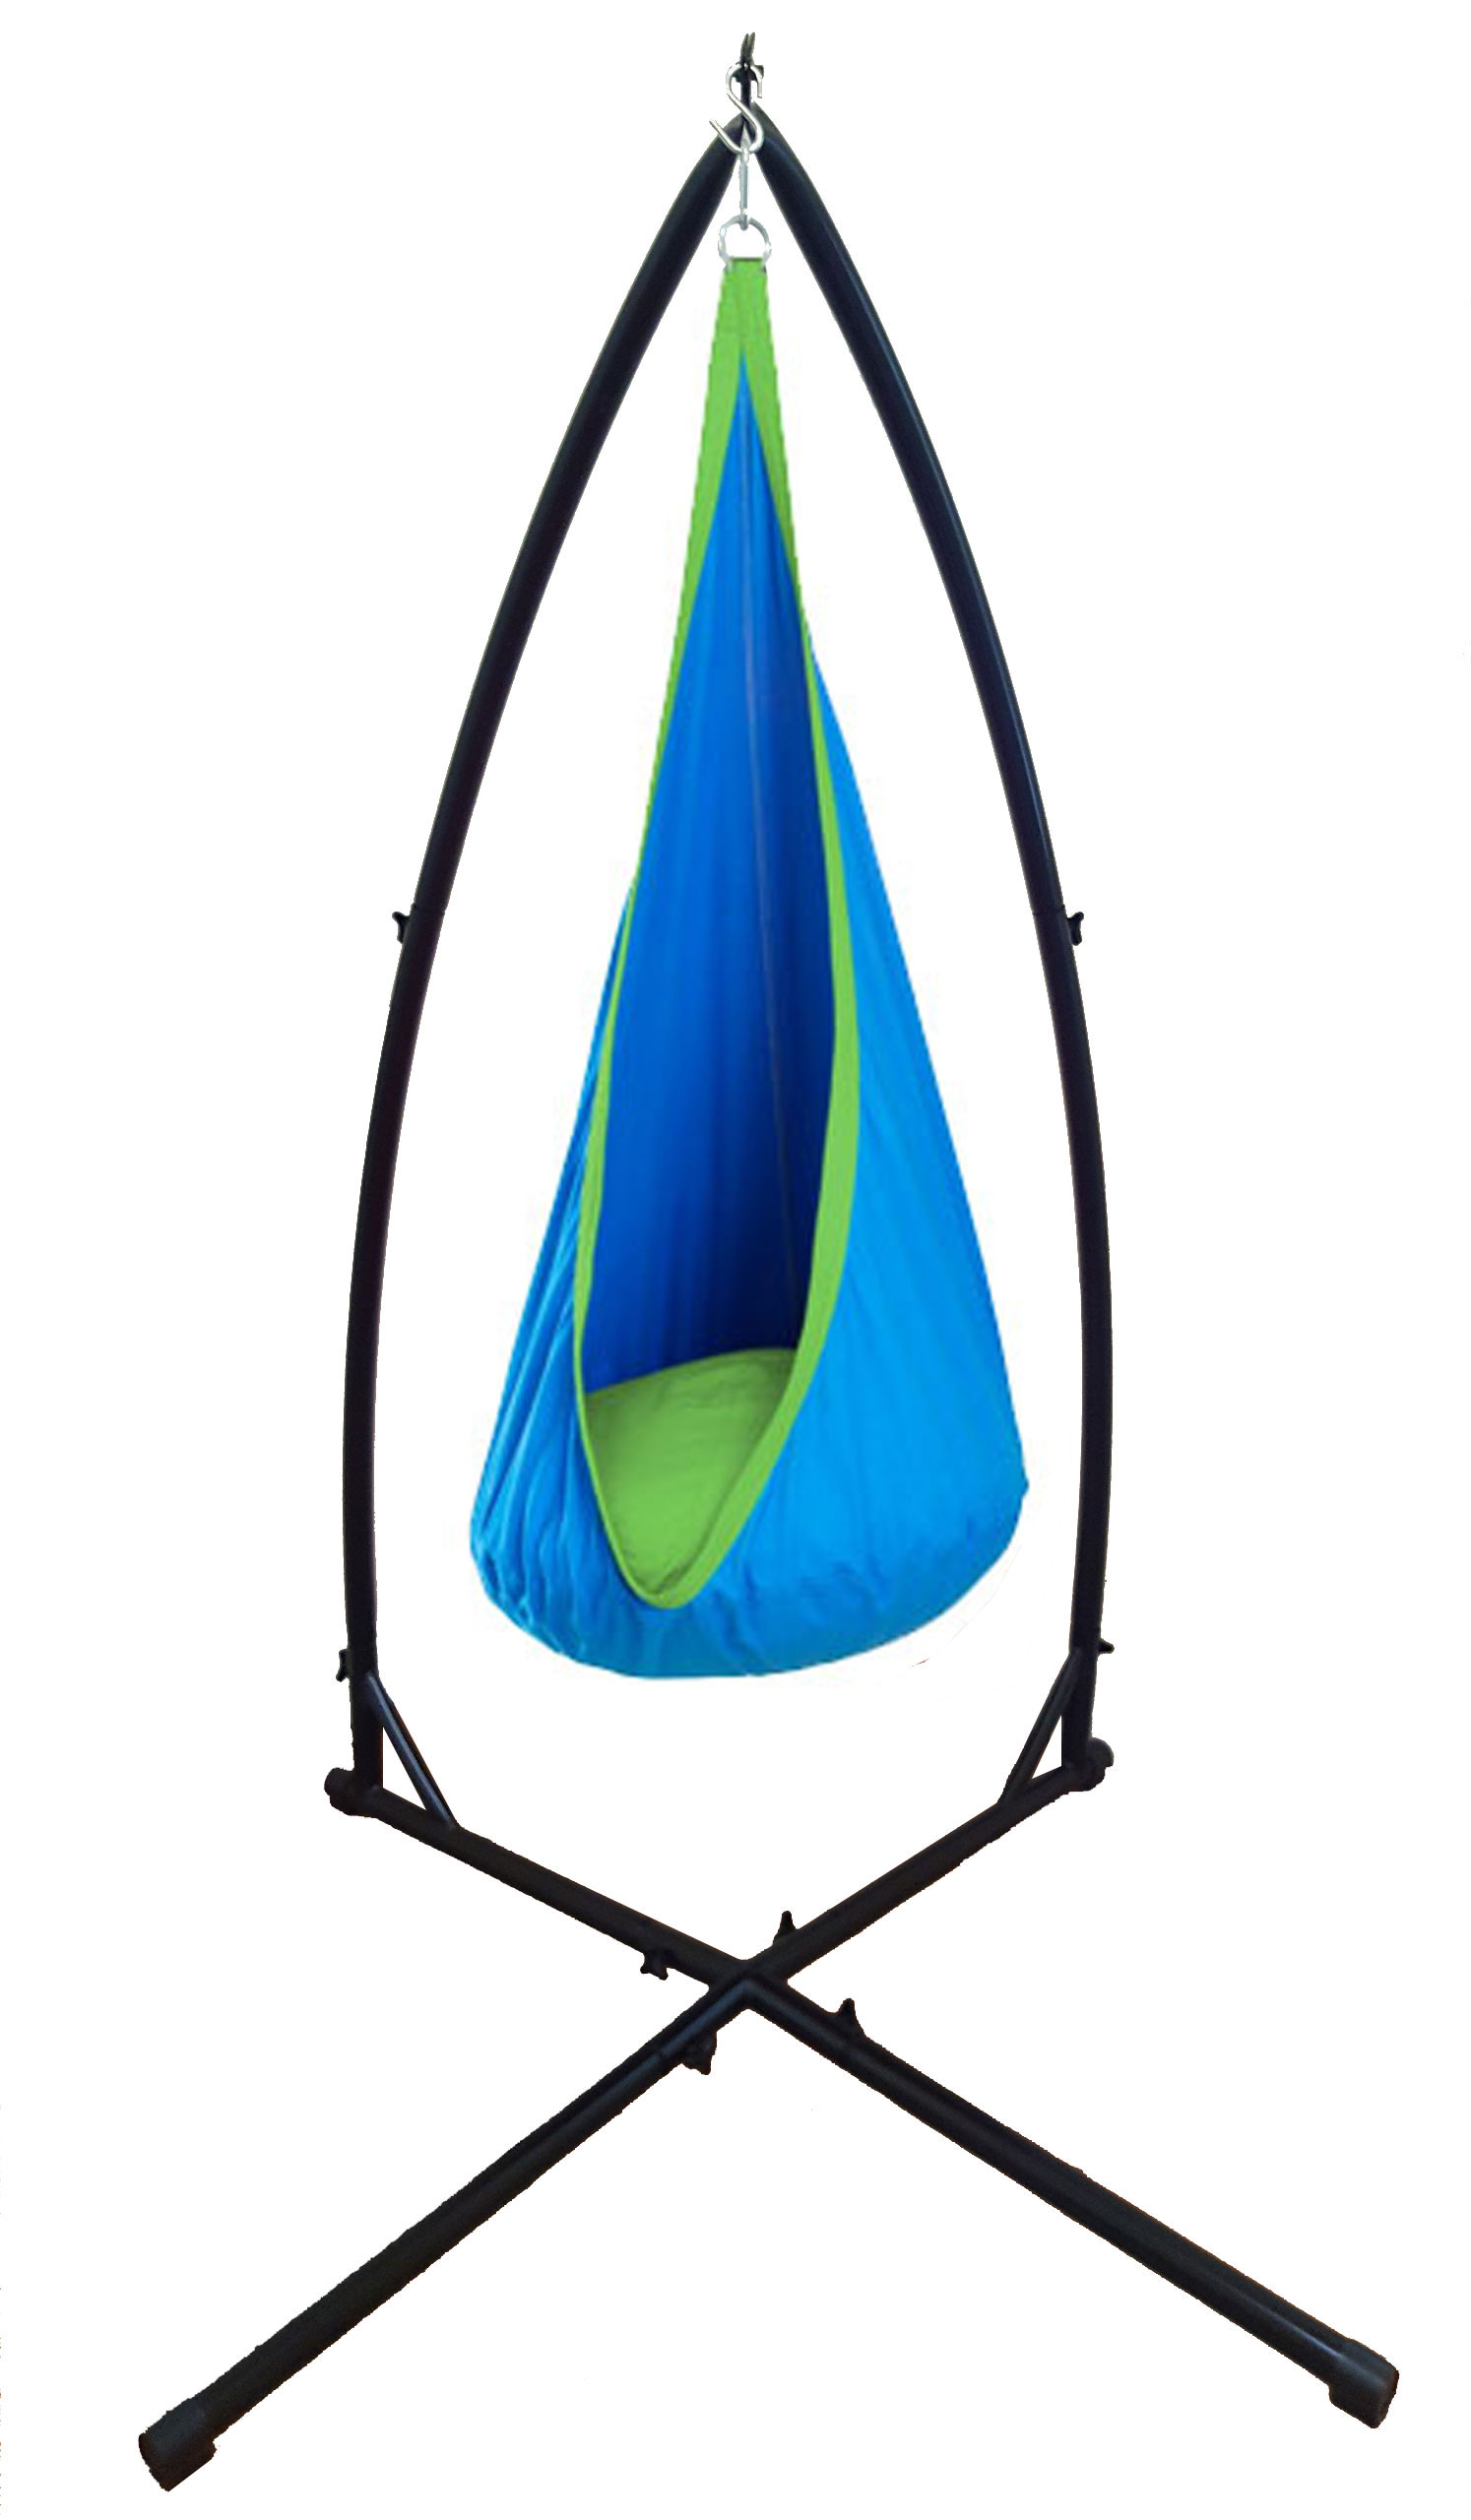 Blue and Green Waterproof Sensory Swing with Stand